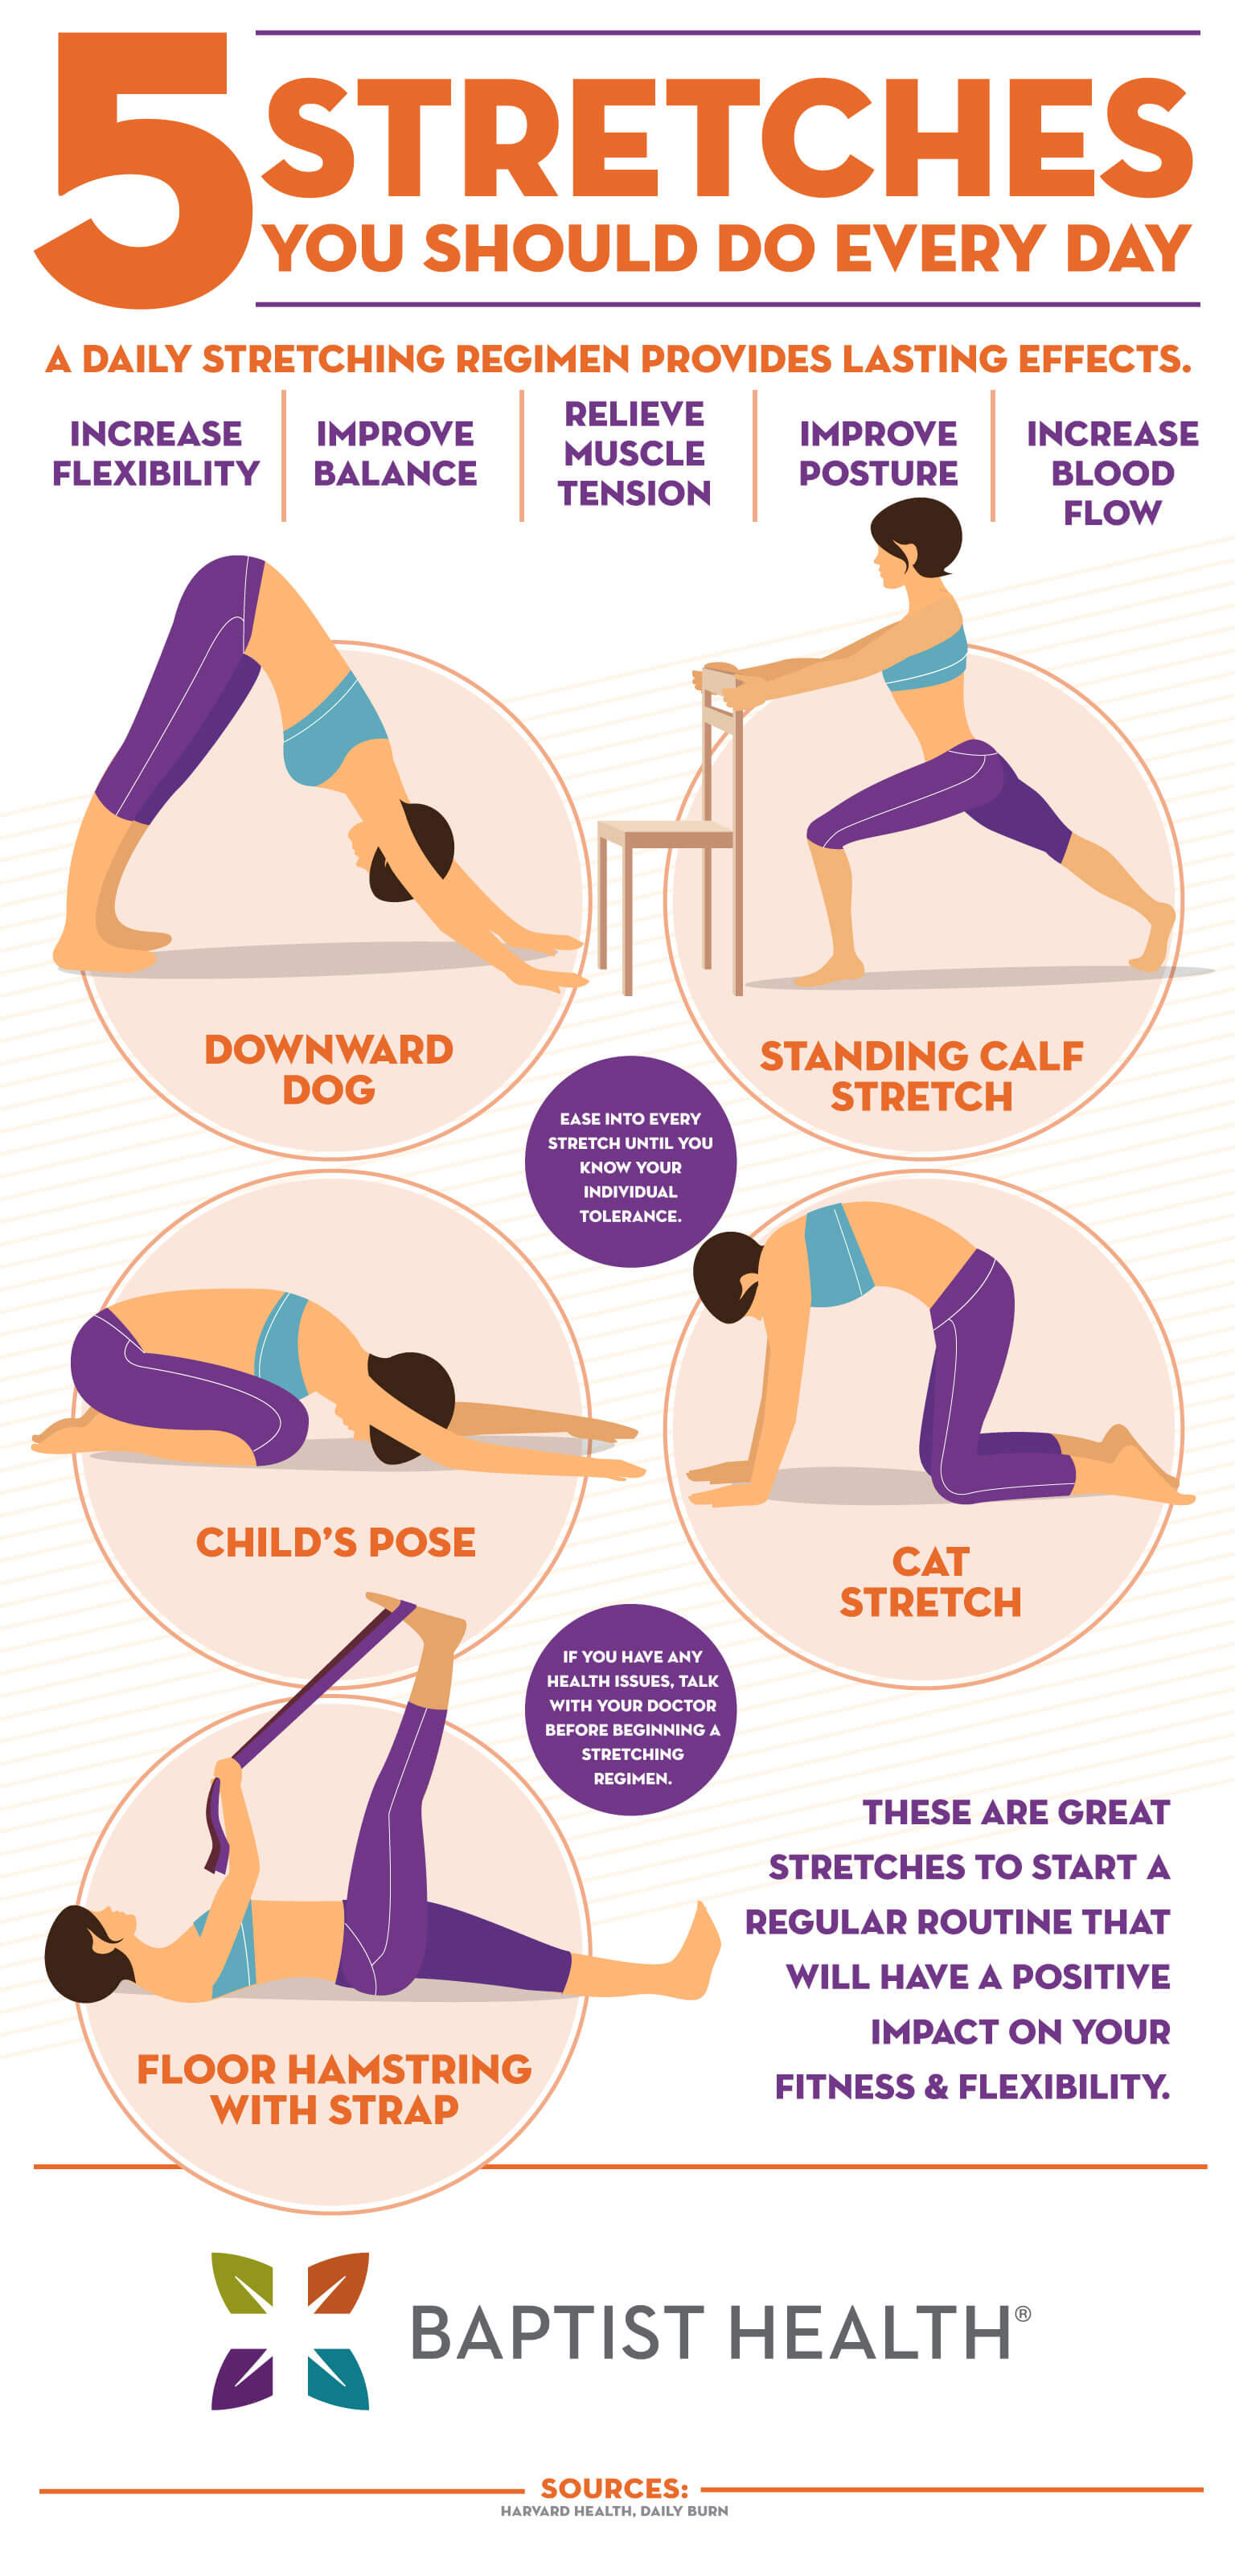 4 Essential Stretches That Improve Your Balance